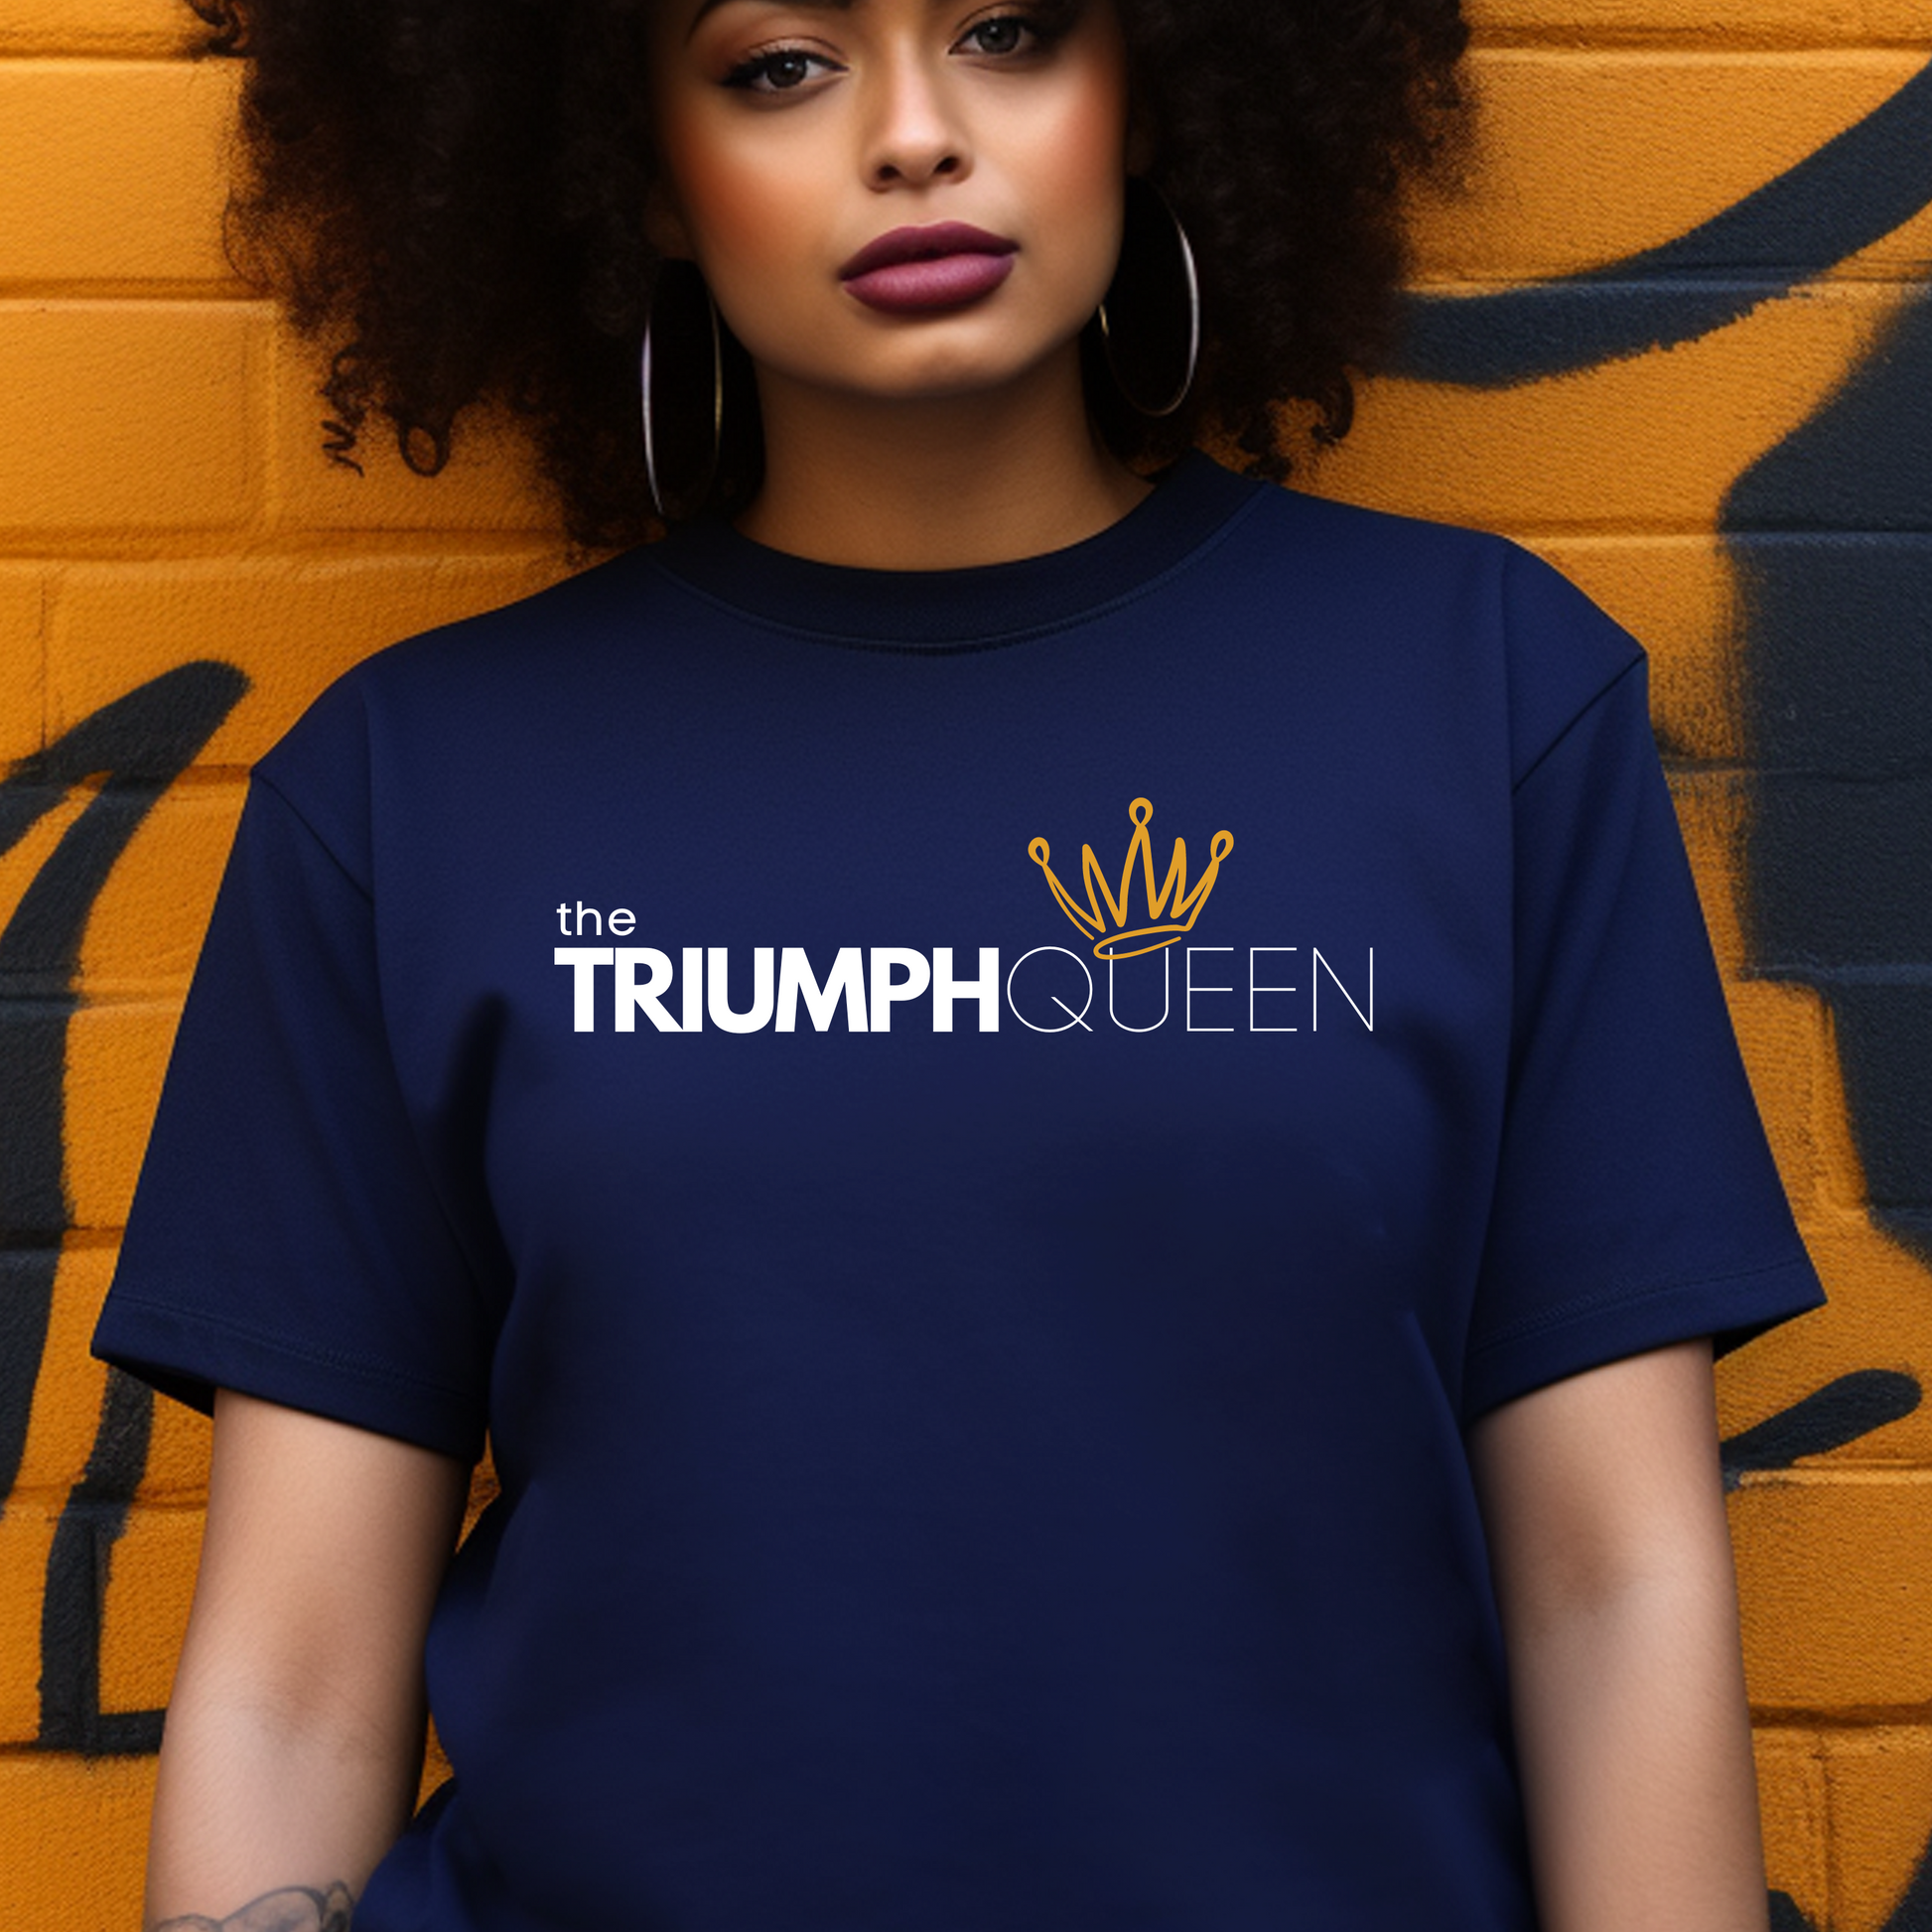 Navy Triumph Queen T-shirt from Triumph Tees, a faith-based clothing brand. This quality Christian t-shirt showcases a bold, white logo in the centre, representing faith and empowerment. Ideal for those seeking trendy faith apparel.